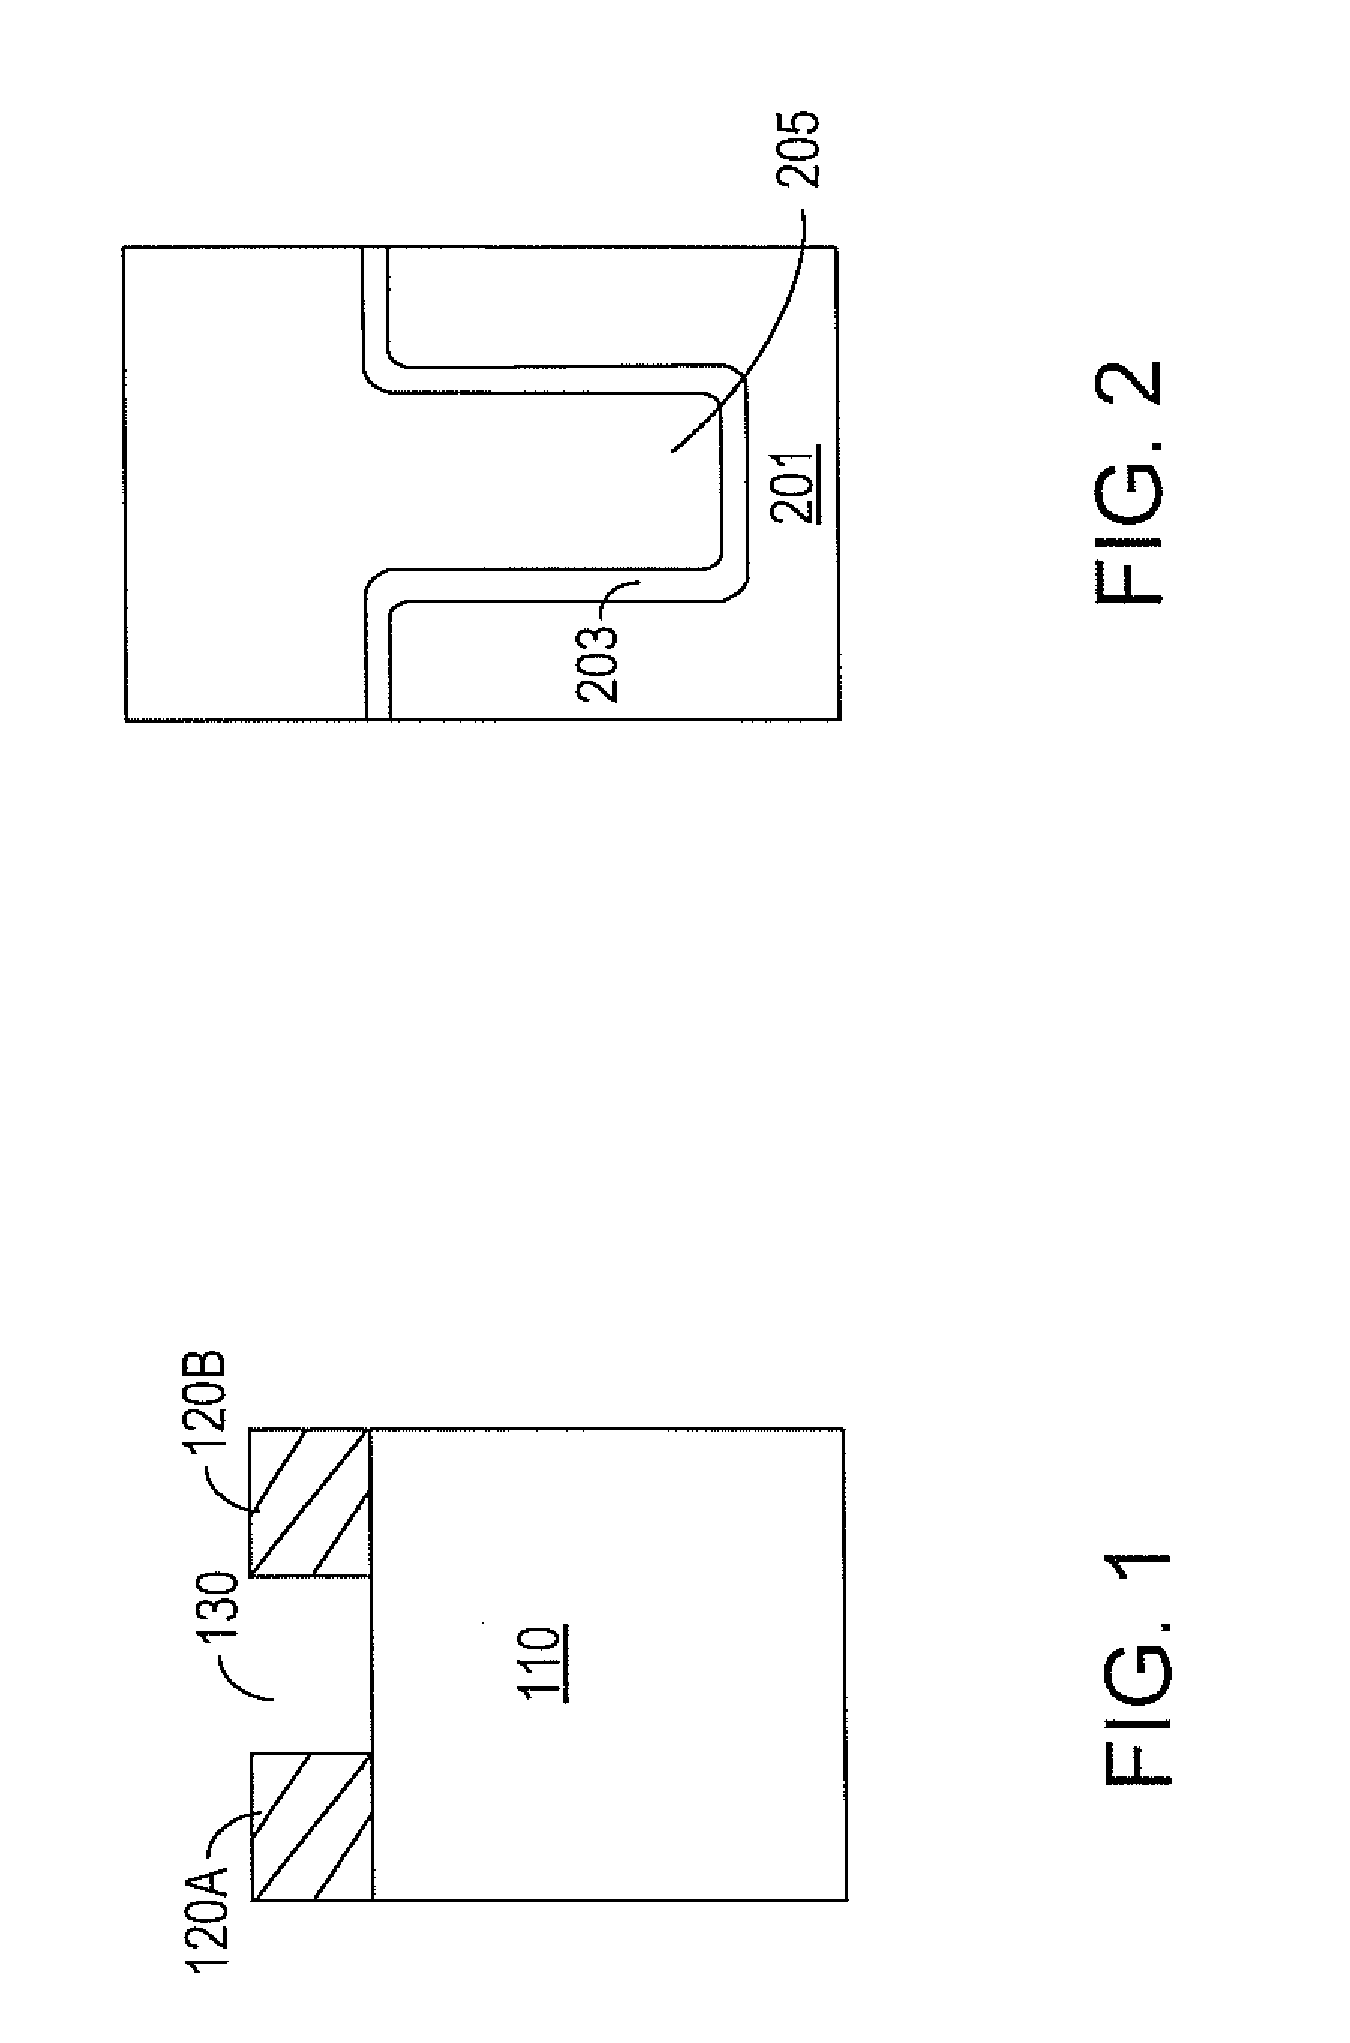 Methods for fabricating trench metal oxide semiconductor field effect transistors